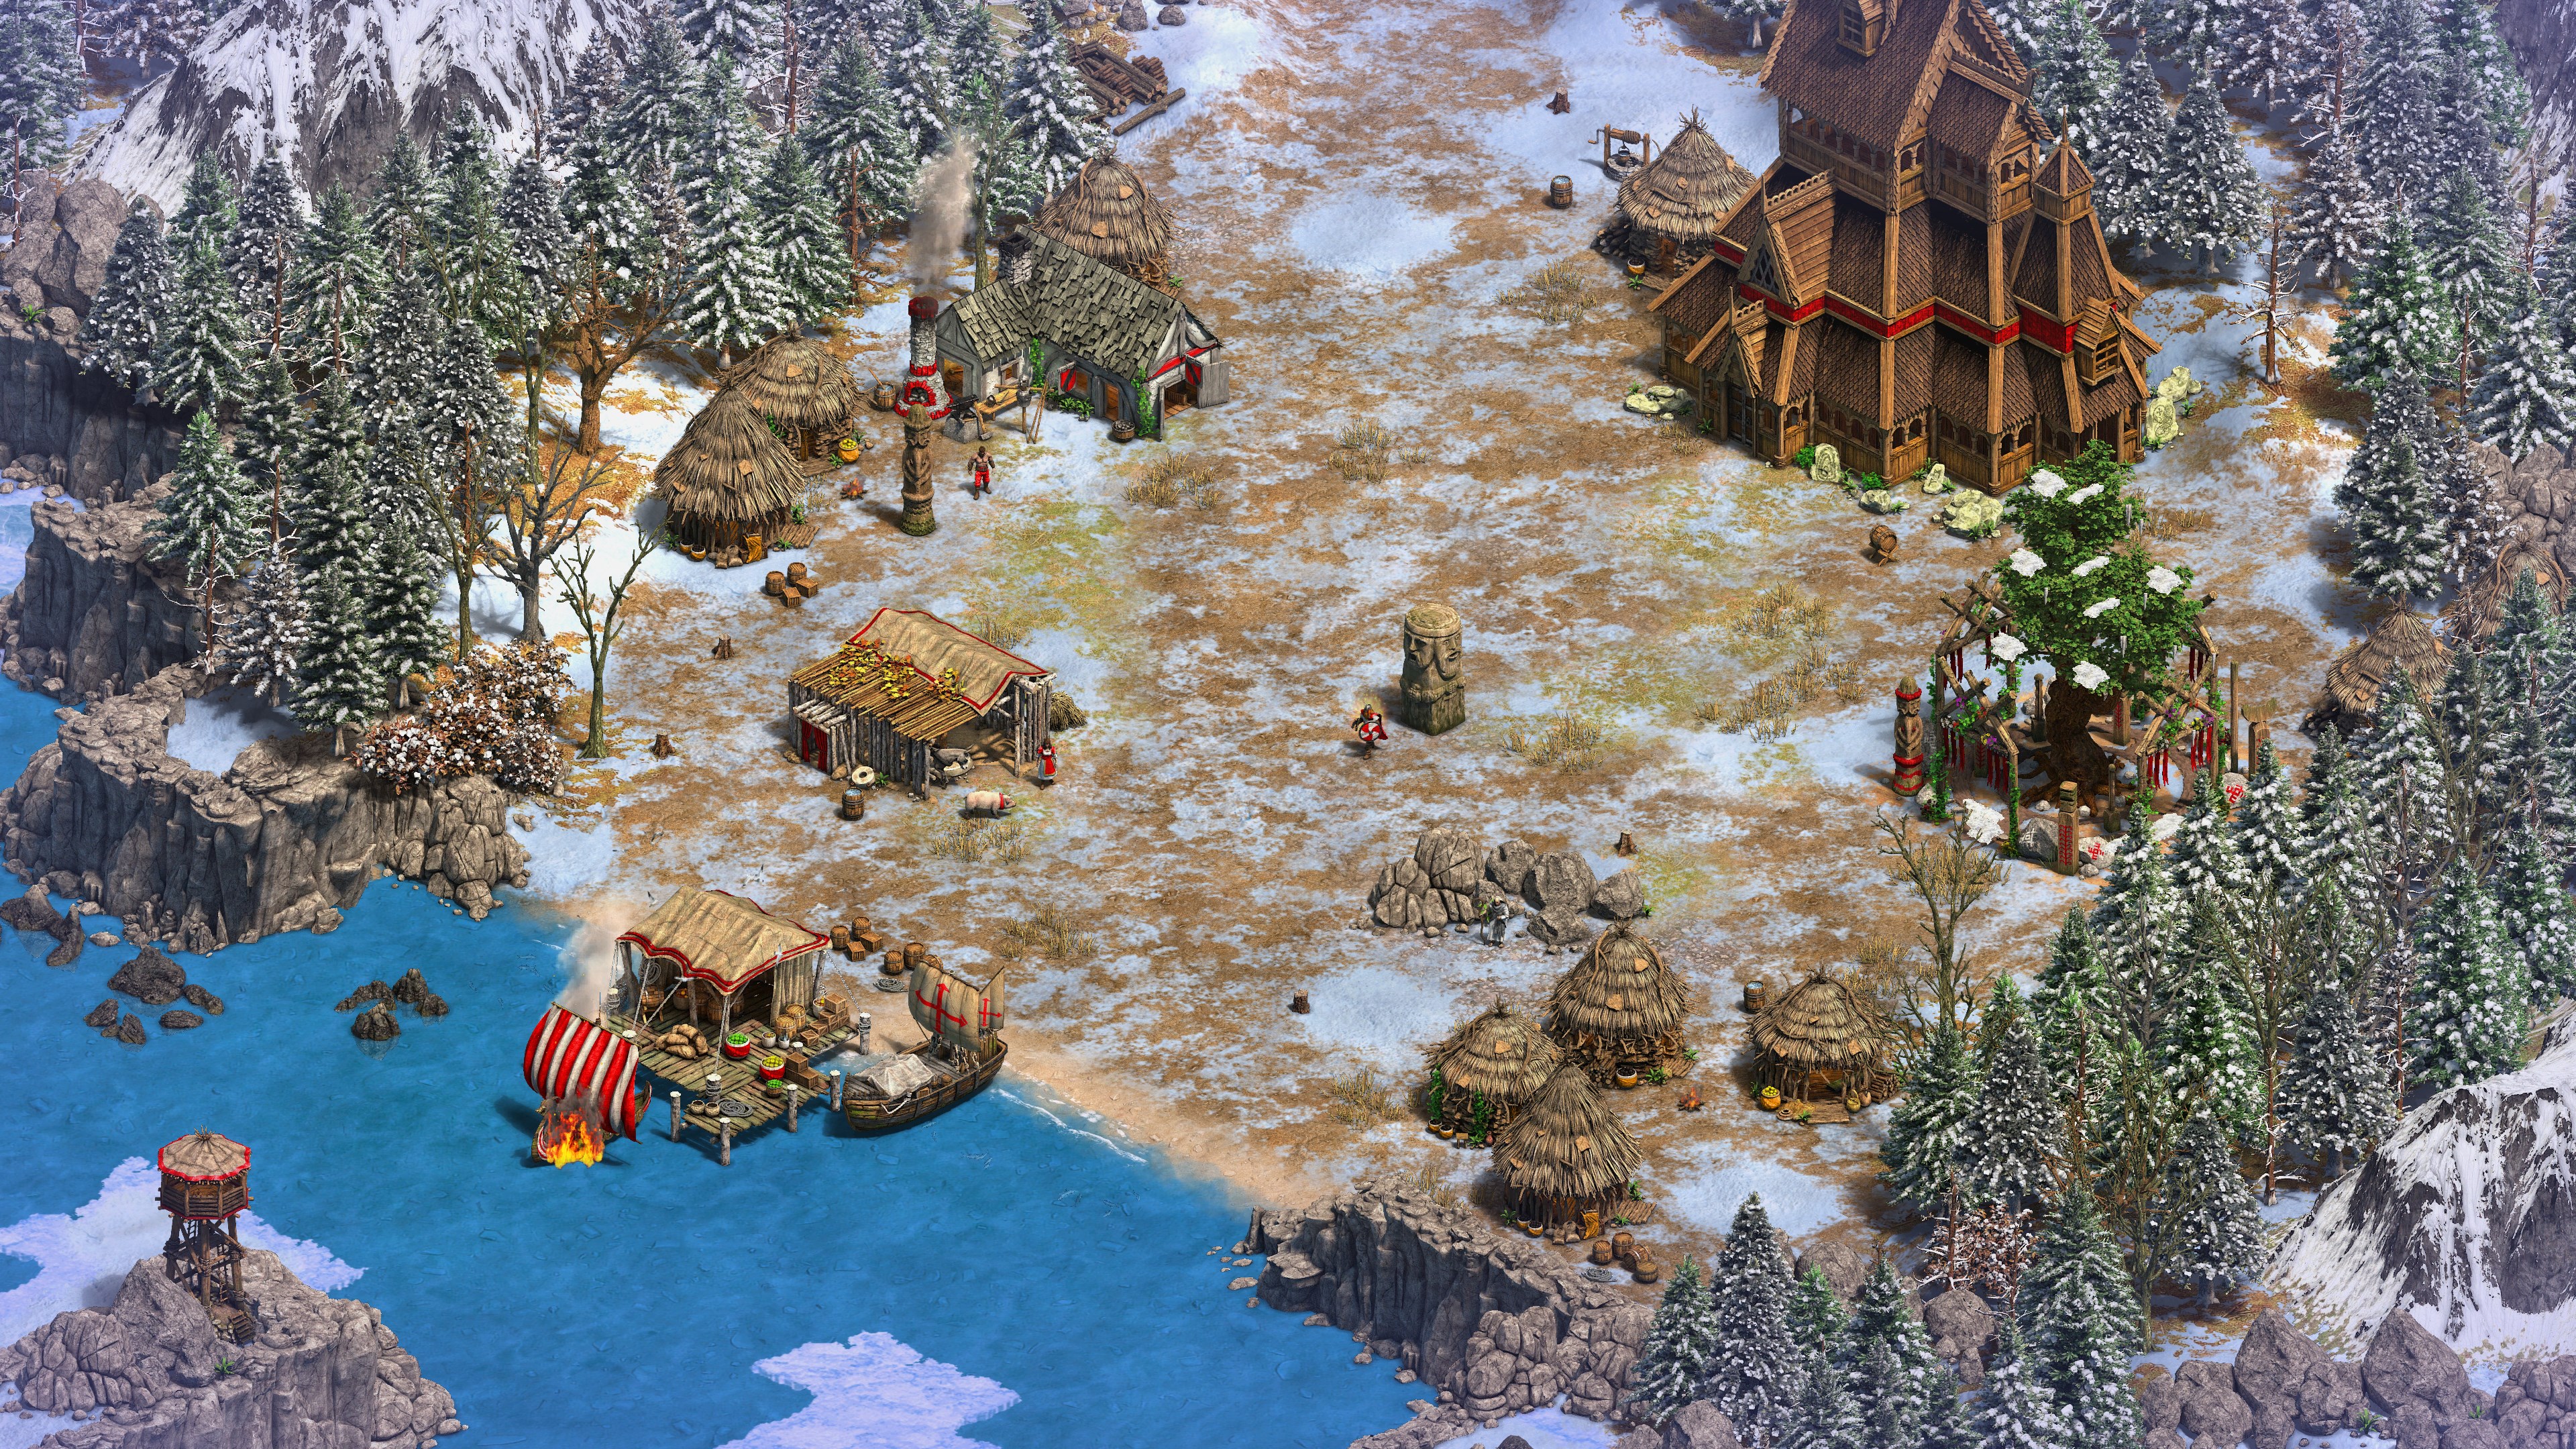 Age of Empires II: Definitive Edition - Victors and Vanquished screenshot 66399